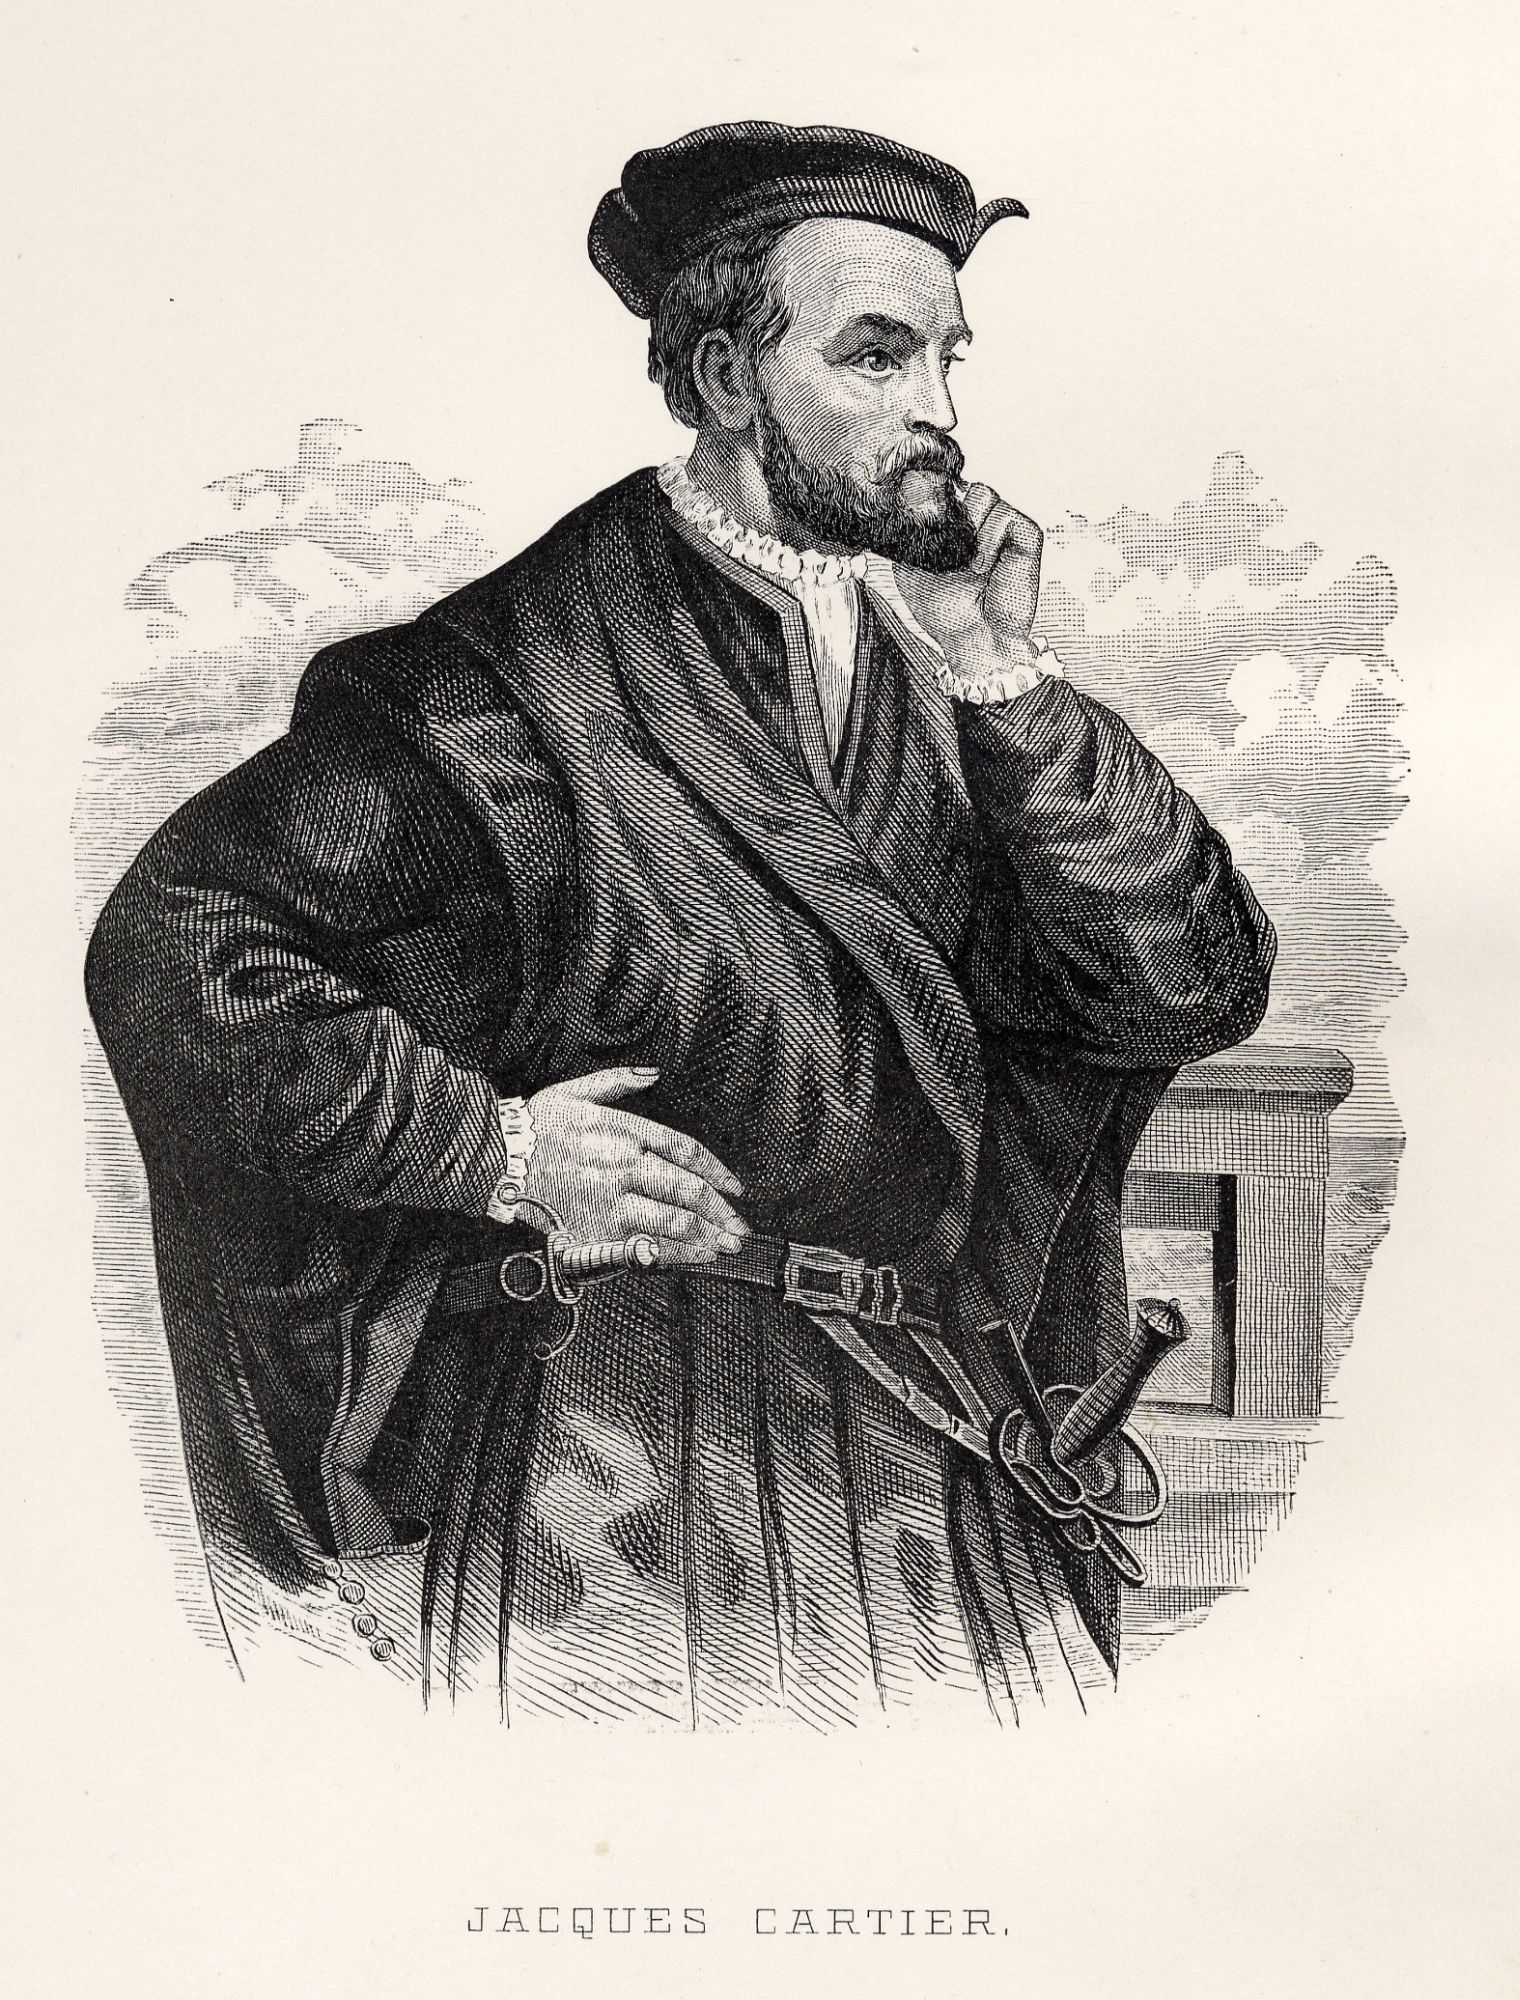 what year did jacques cartier discover canada